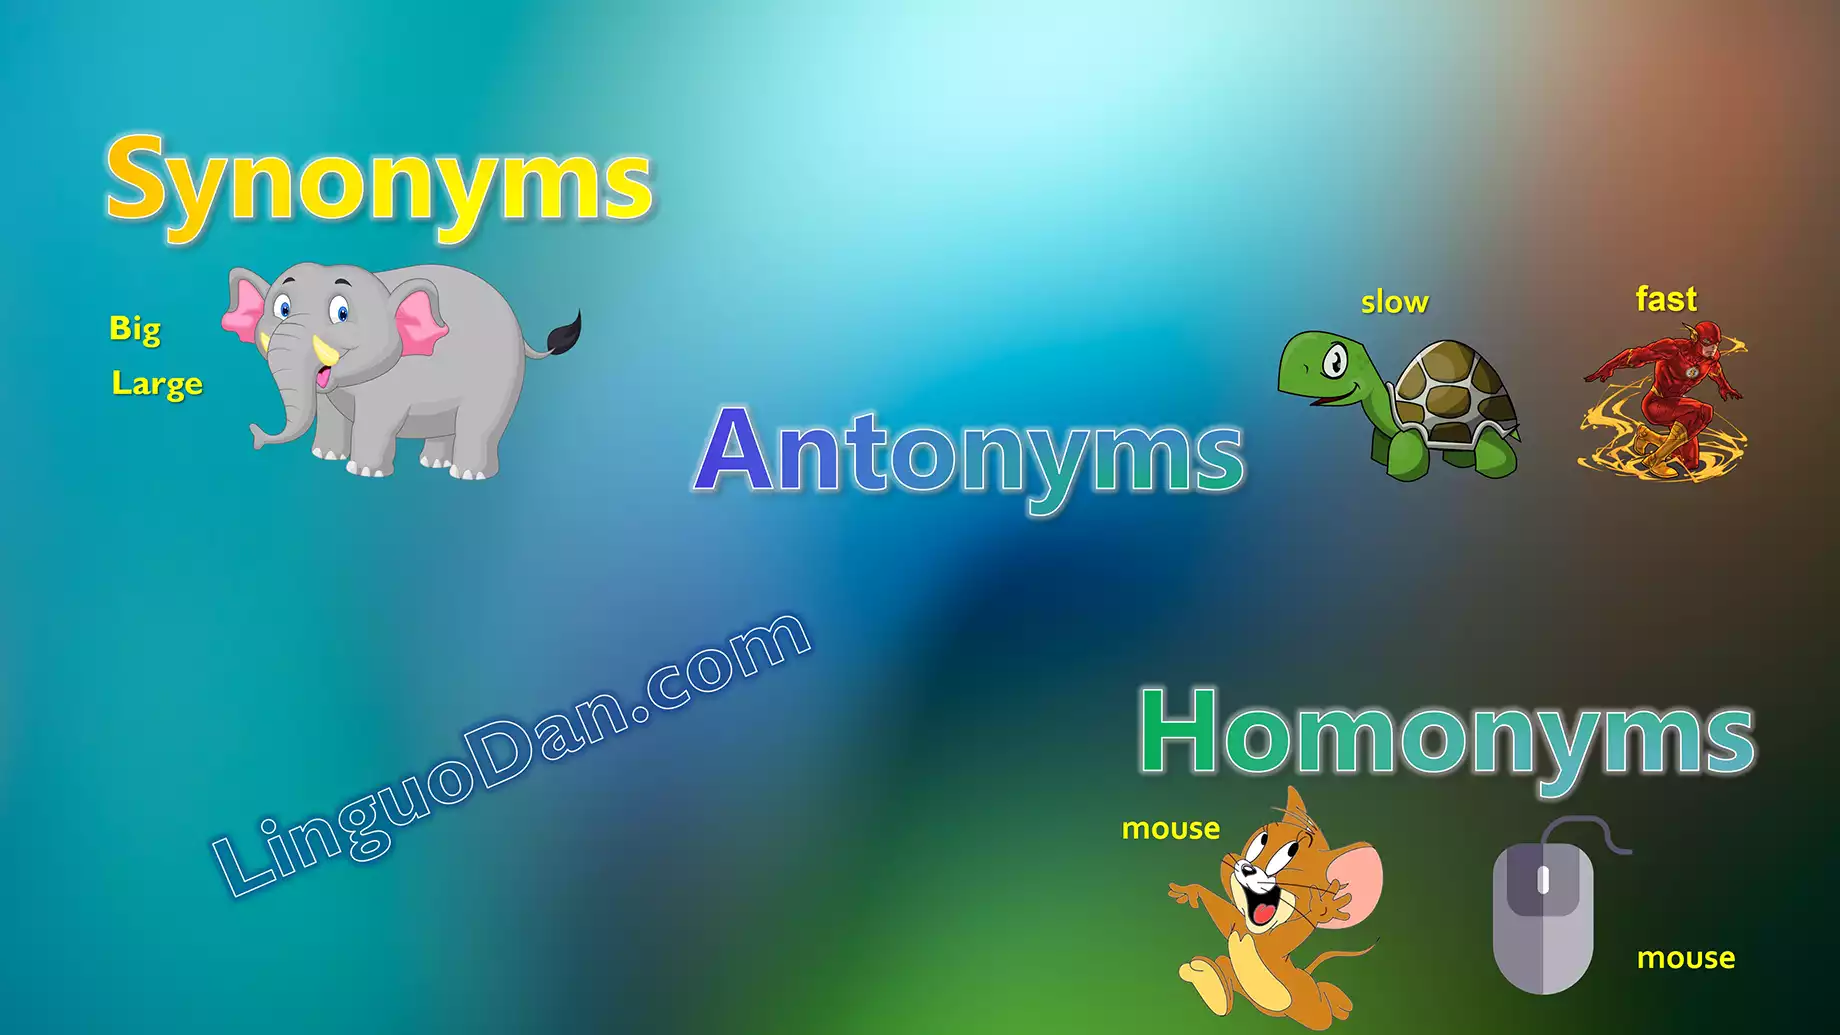 Another word for MISTAKE > Synonyms & Antonyms